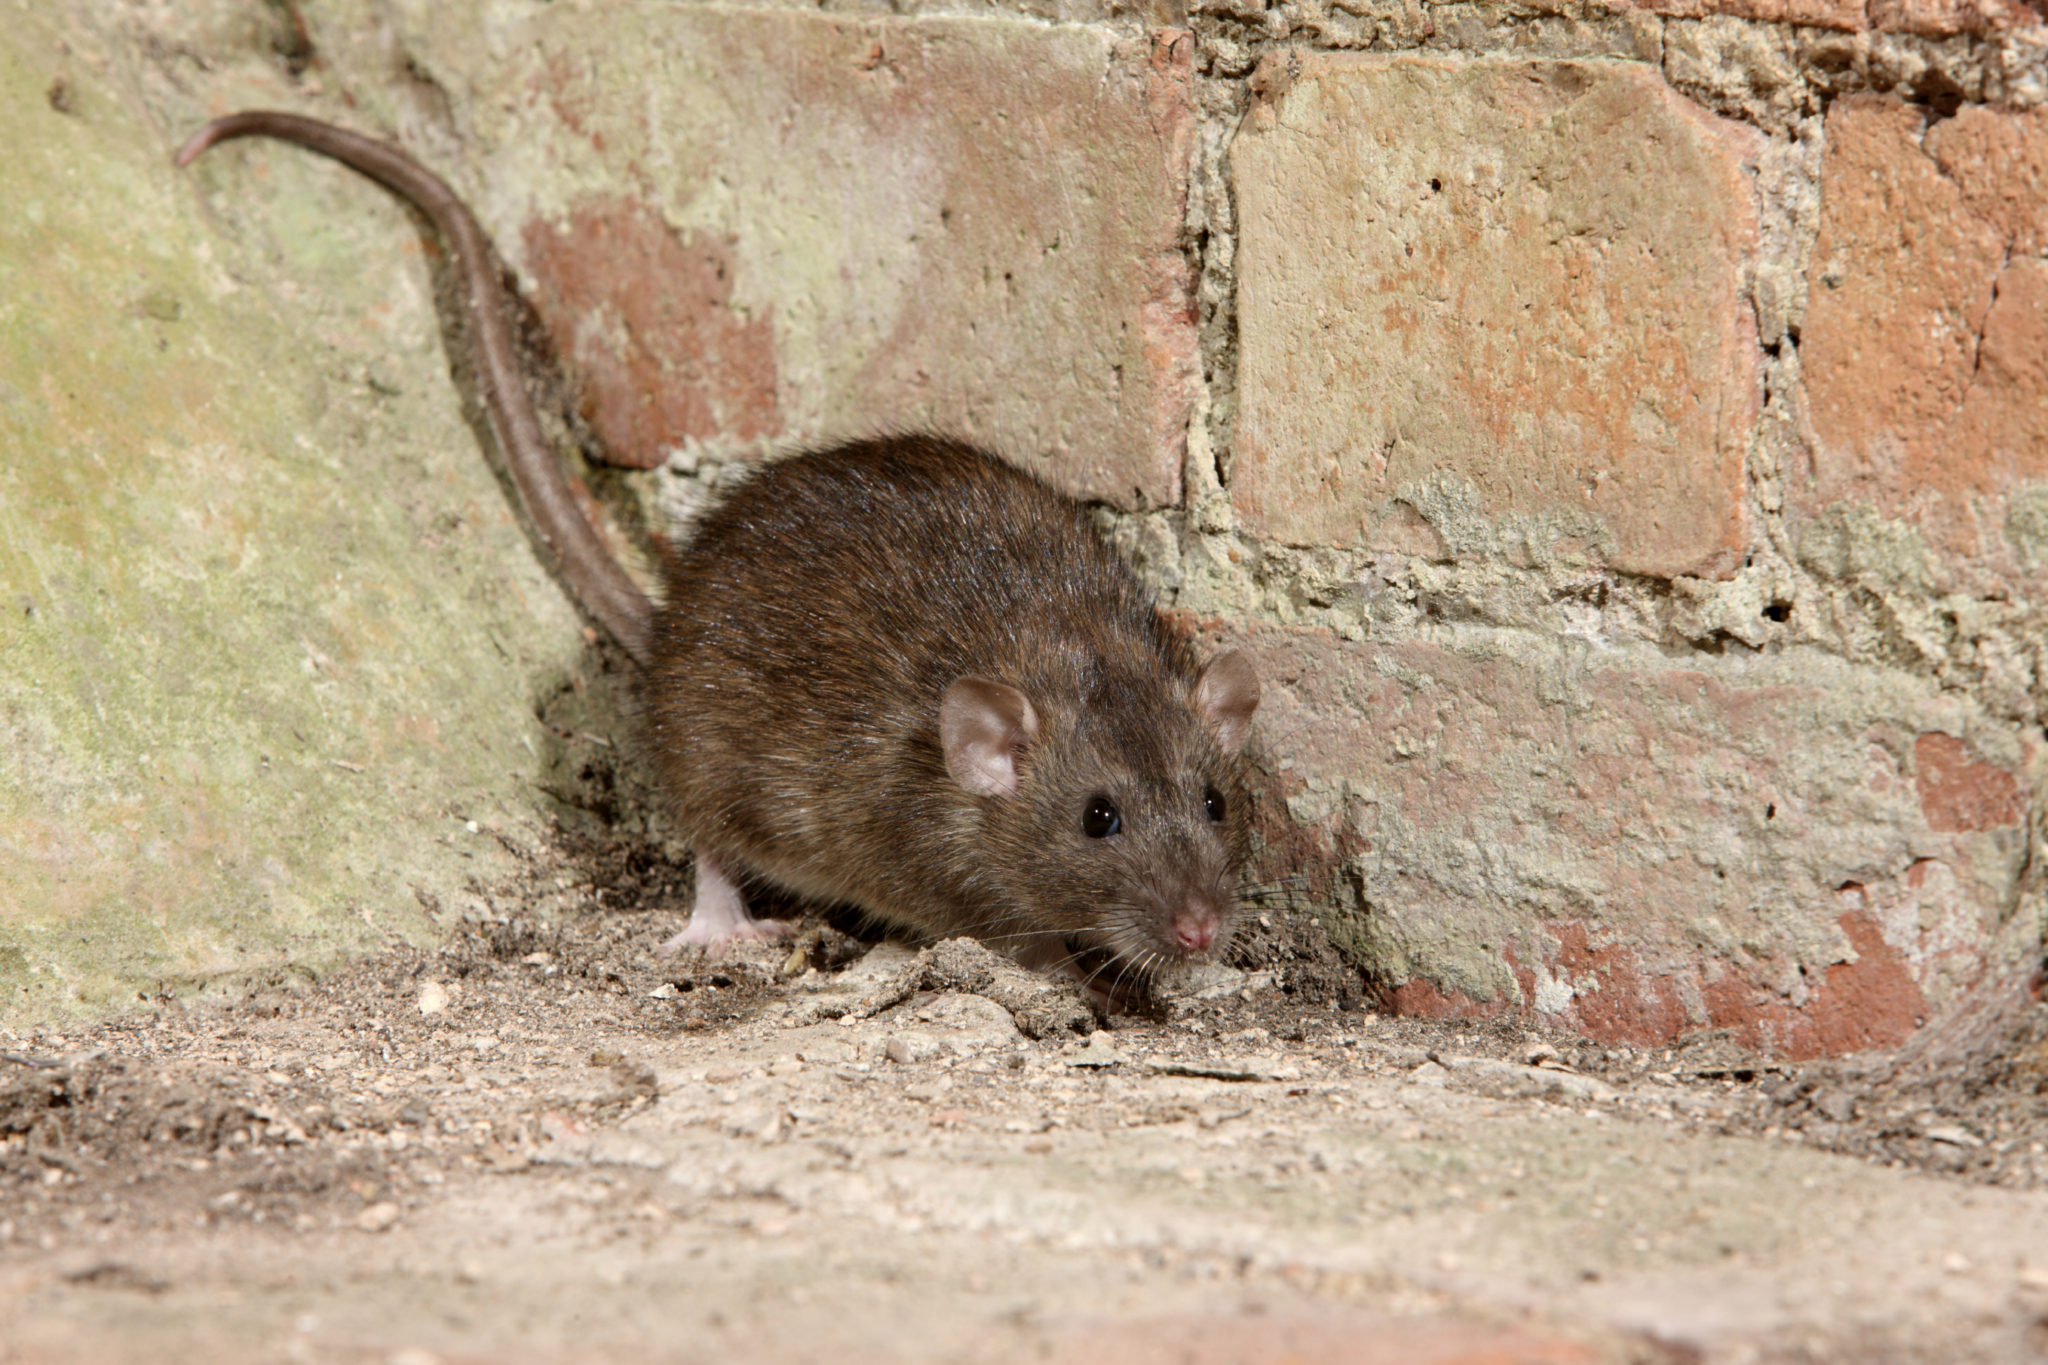 Rodents in Morisset